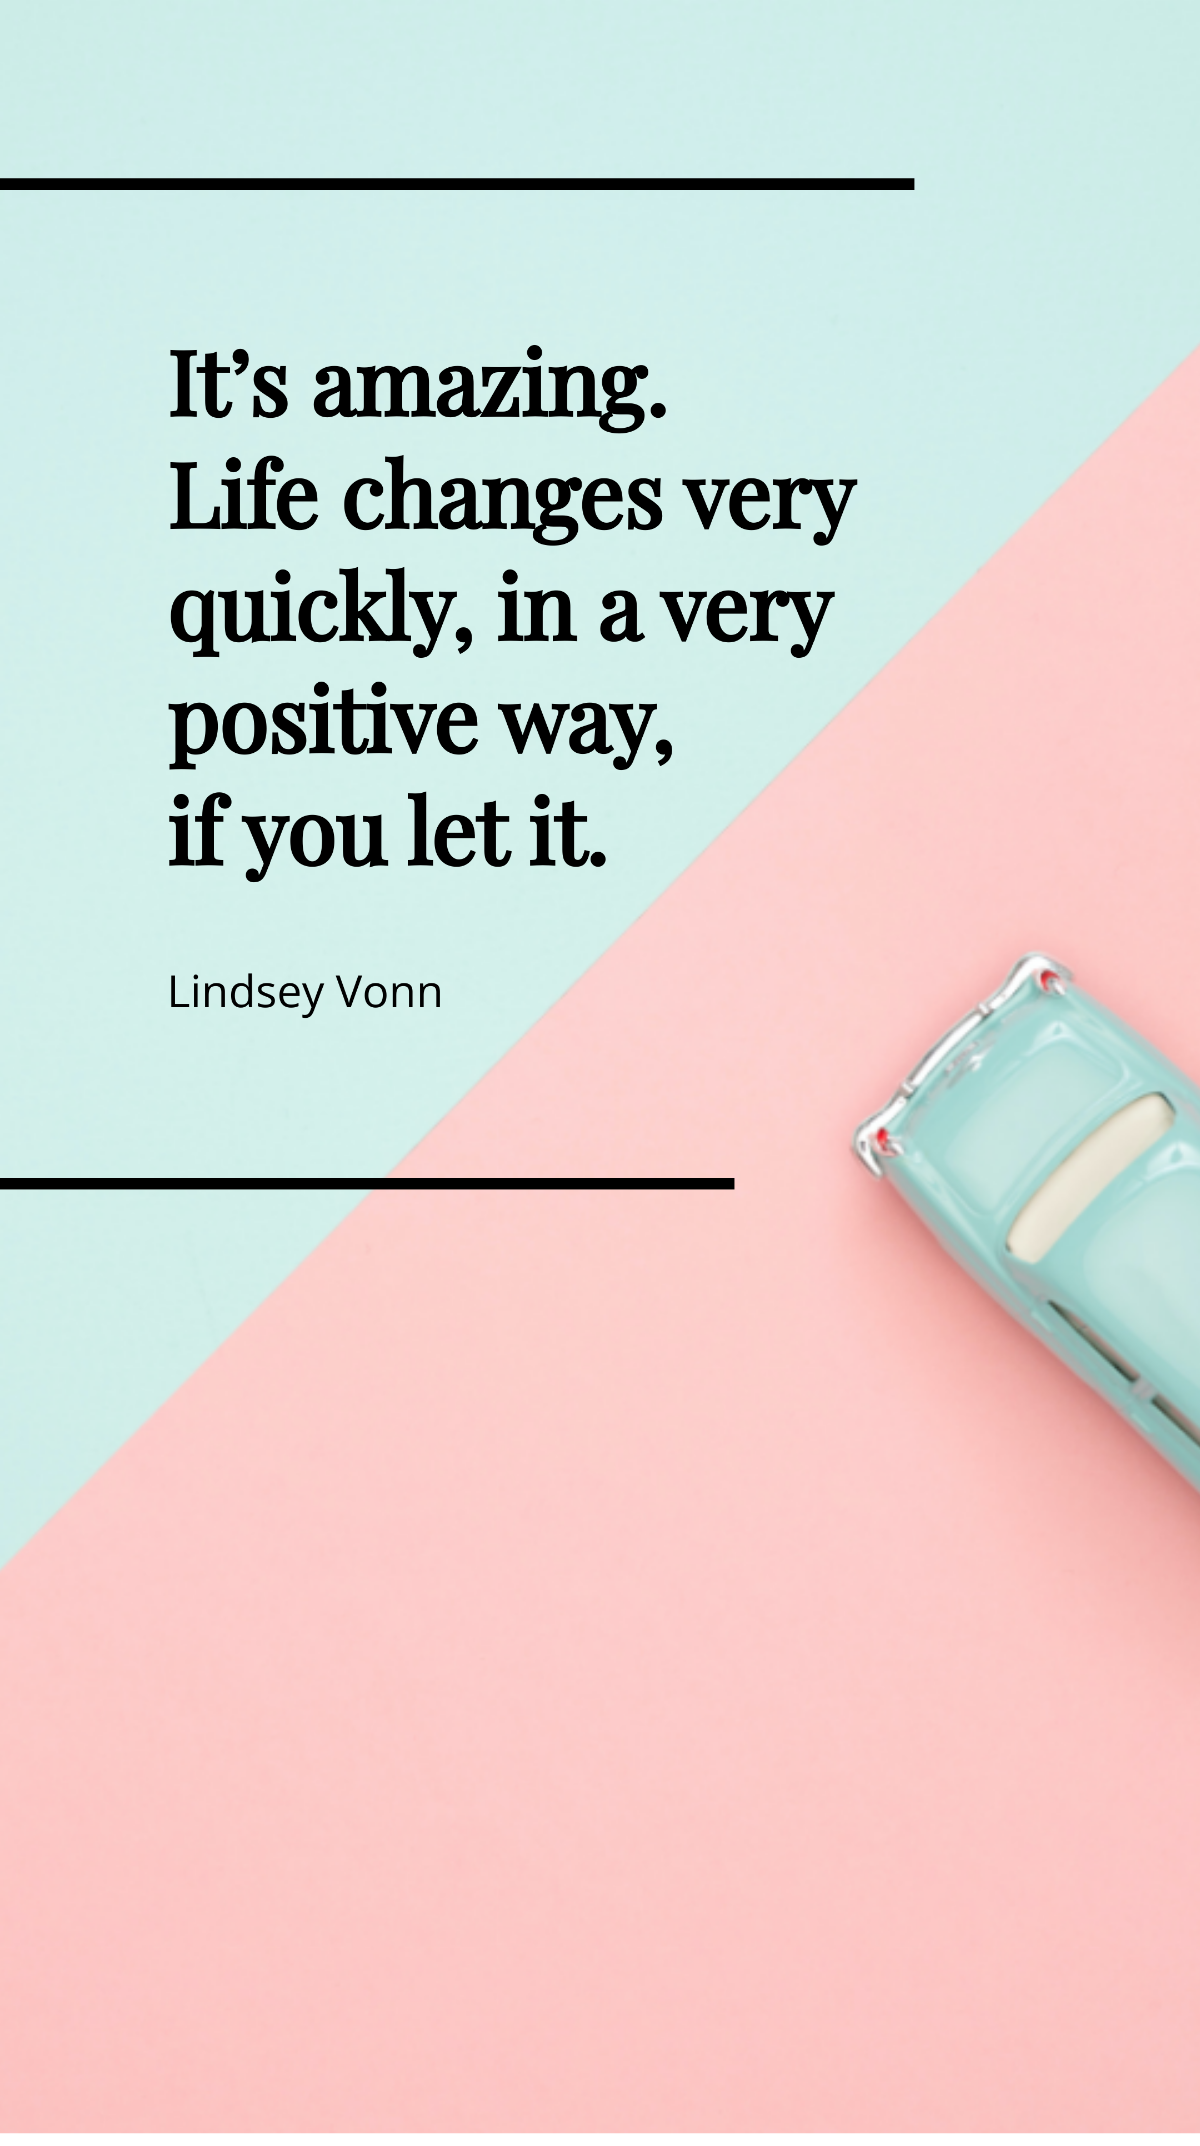 Lindsey Vonn - It’s amazing. Life changes very quickly, in a very positive way, if you let it. Template